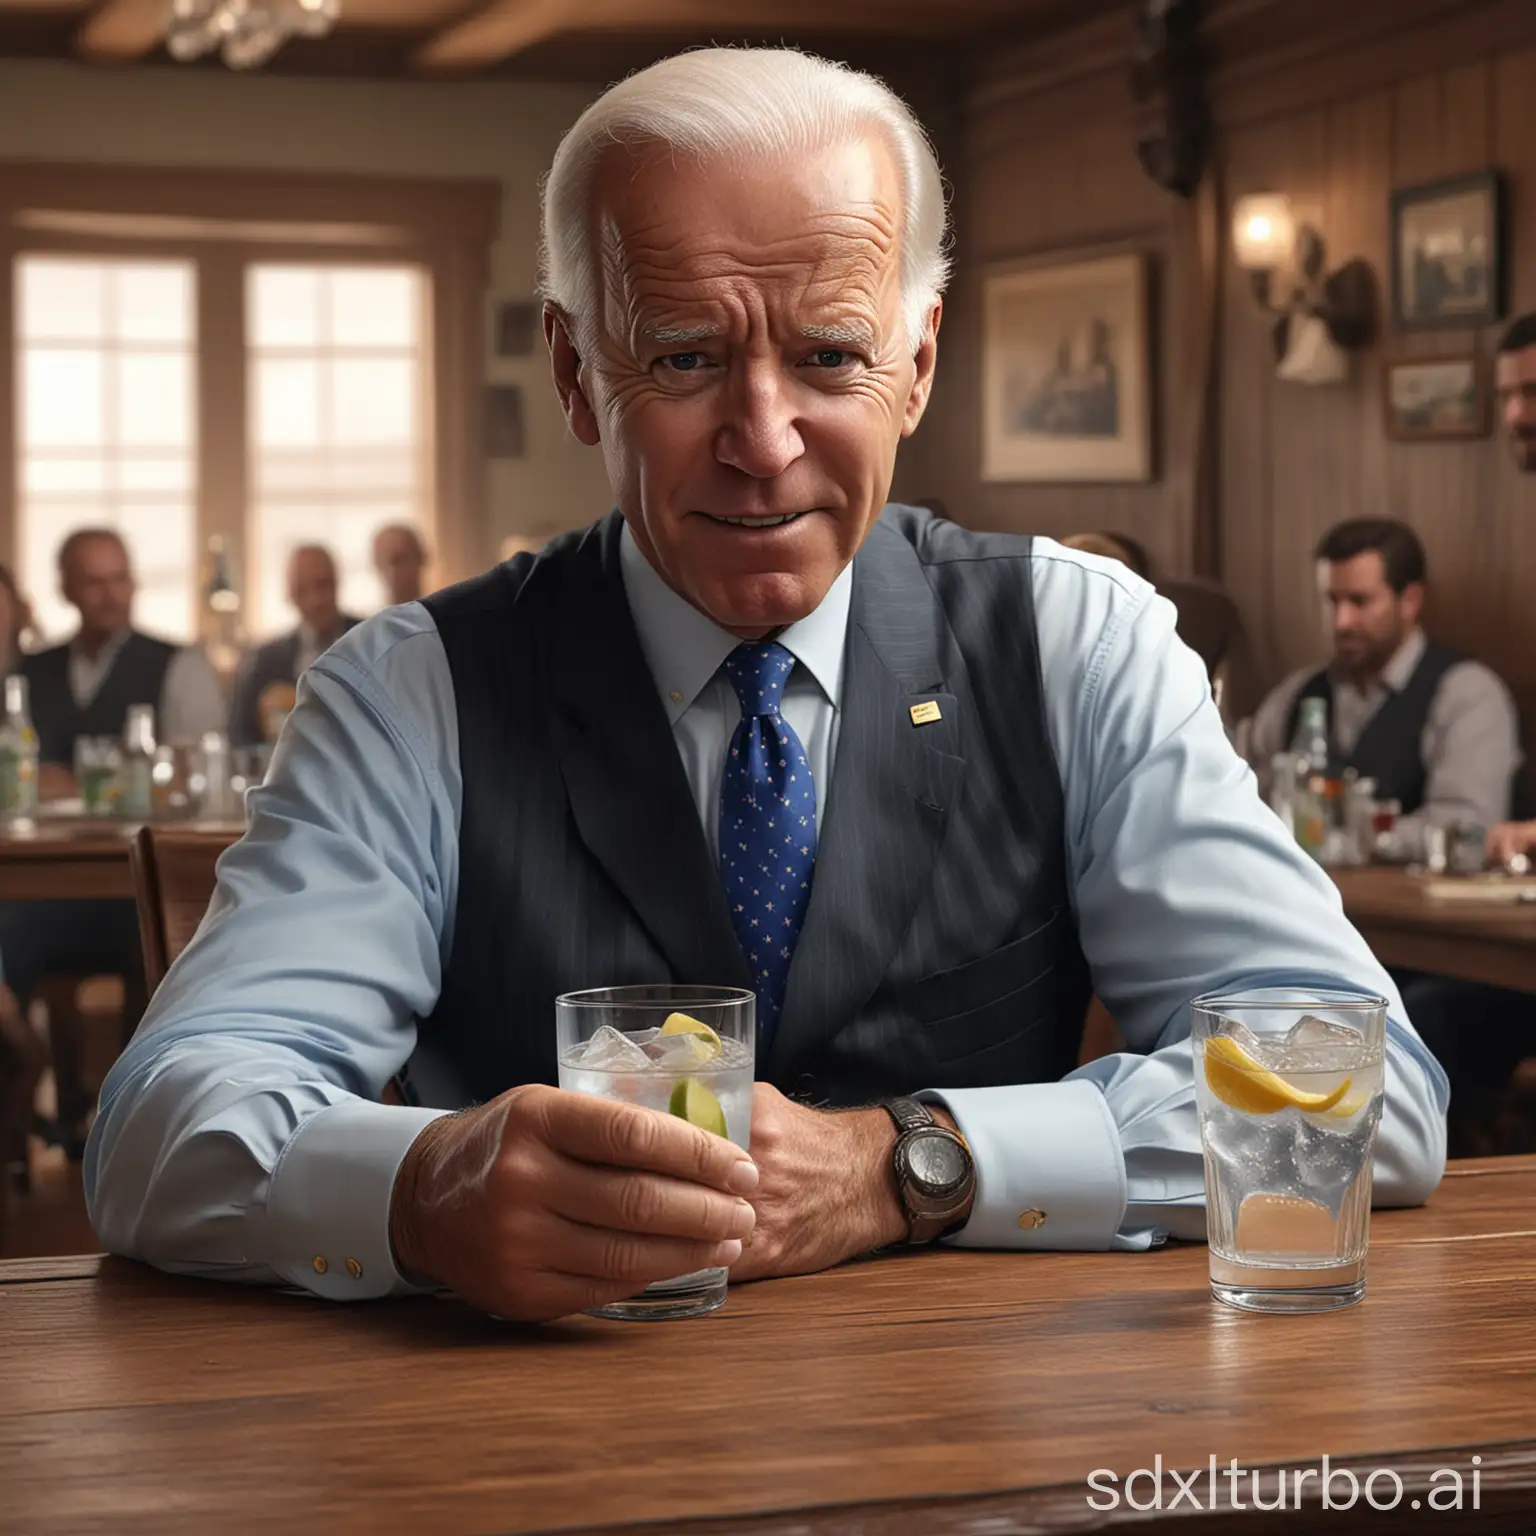 An extremely photo realistic image of Joe Biden with TWO GINTONIC he is HOLDING ONE GIN TONIC IN EACH HAND about to OUT DRINK his COMPETITION IN A WESTERN SHOOTOUT STYLE DRINK OFF under the table, Party, Western, Presidential, 8k, photorealistic